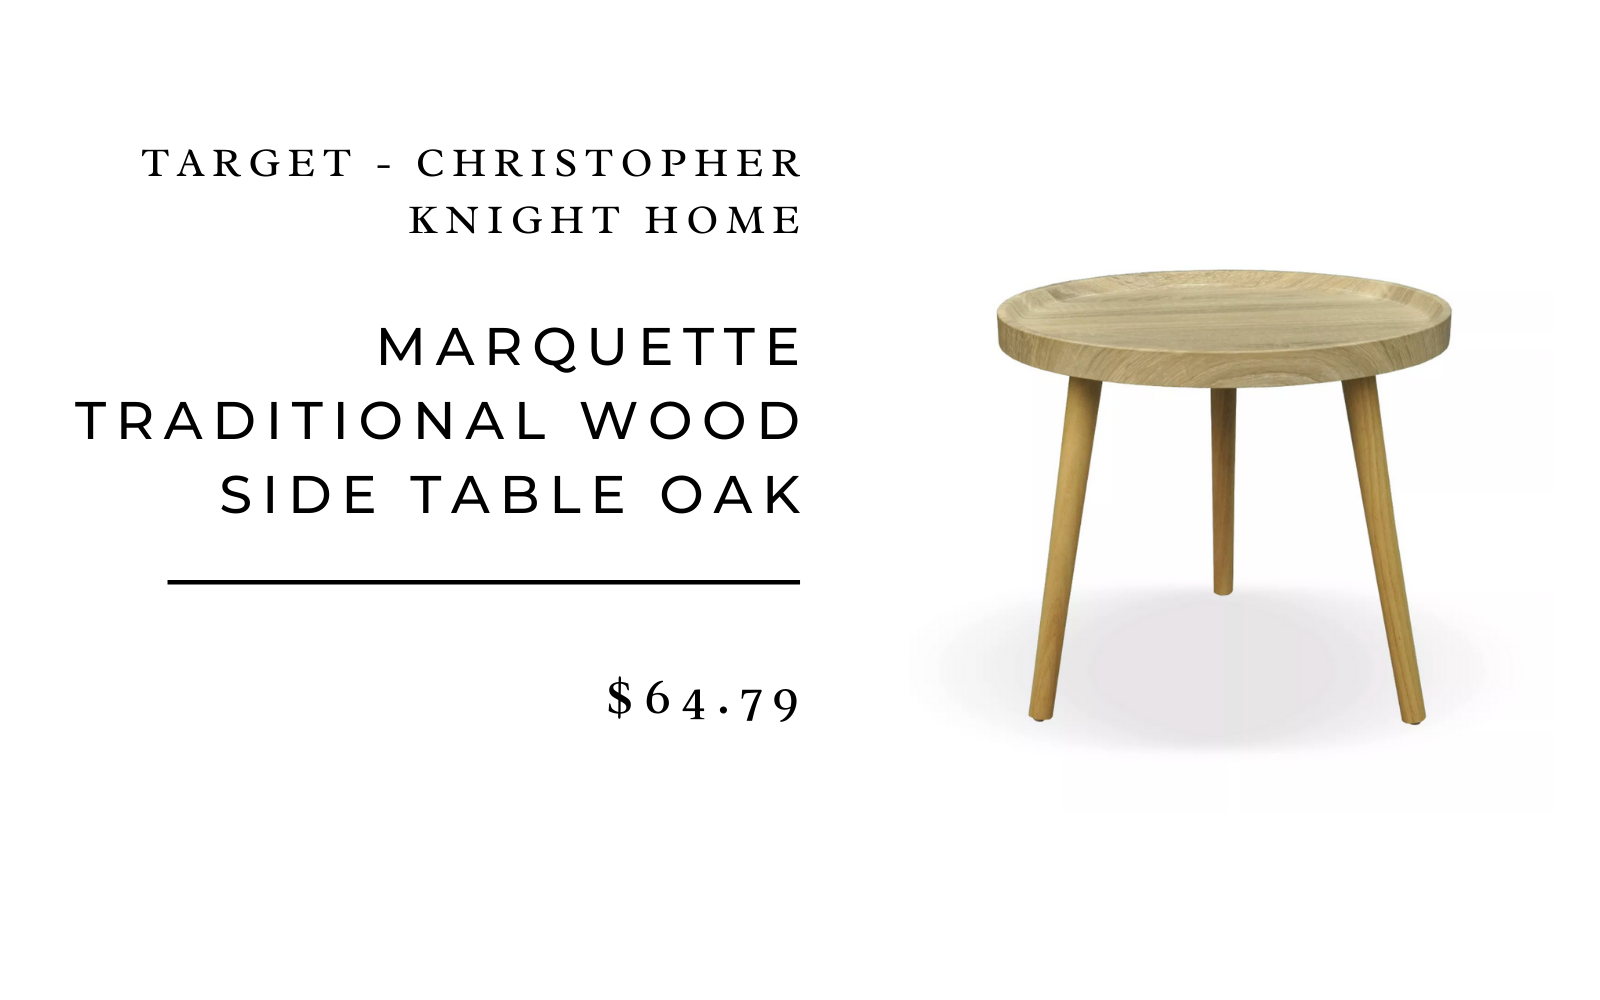 Christopher Knight Home Target Marquette Traditional Wood Side Table Oak